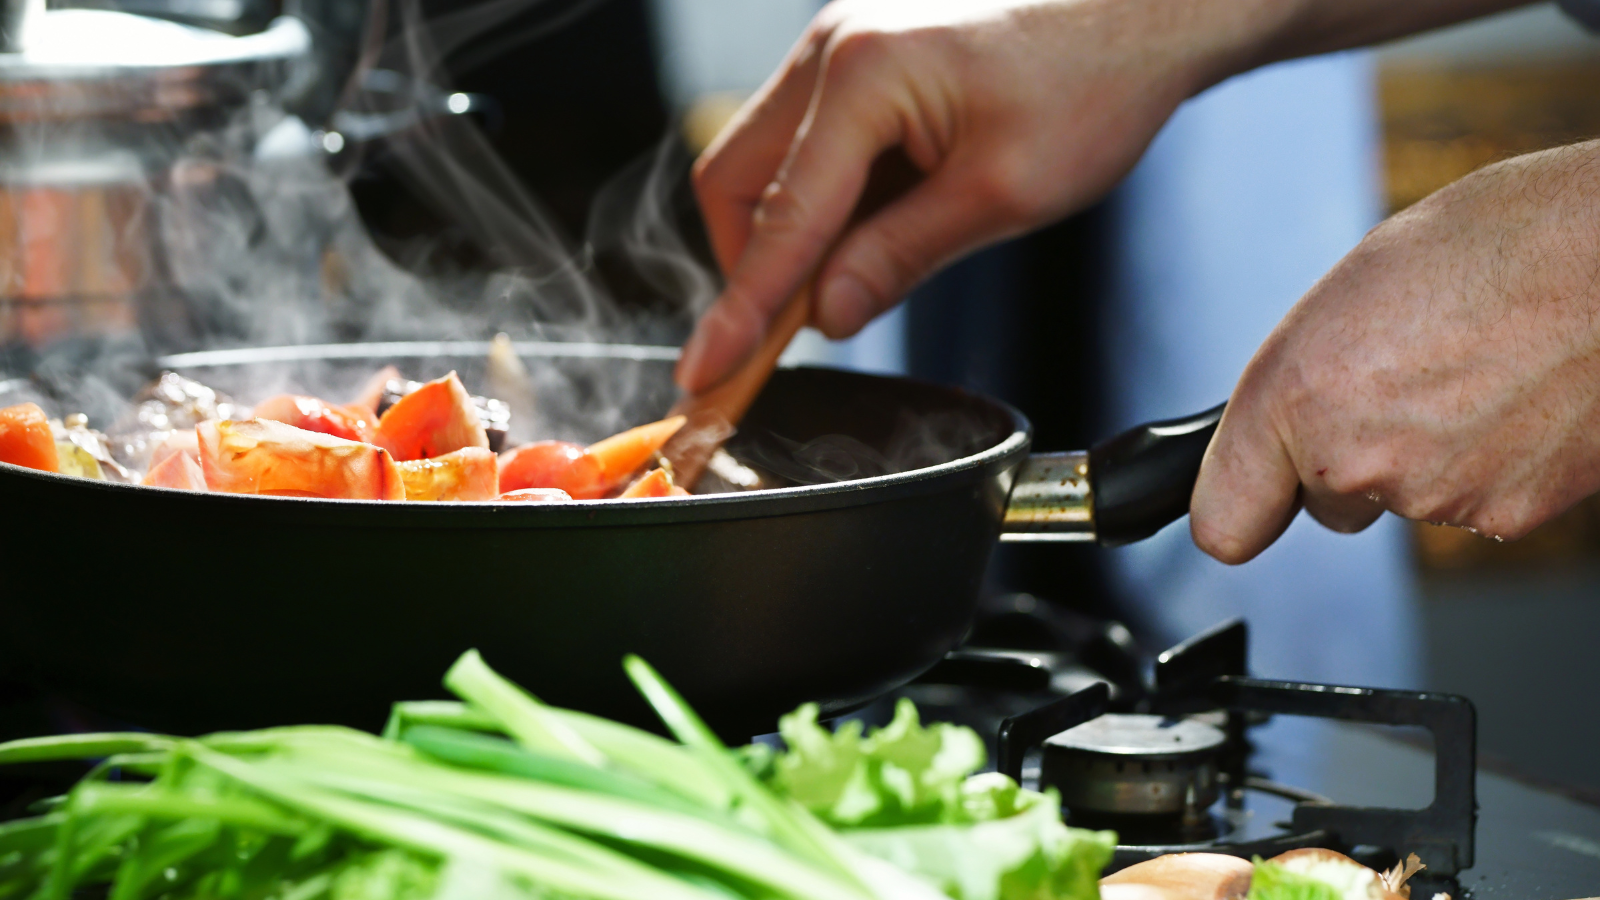 Healthy Cooking Class with the Mayor’s Office of Food Policy: Friday, July 28th